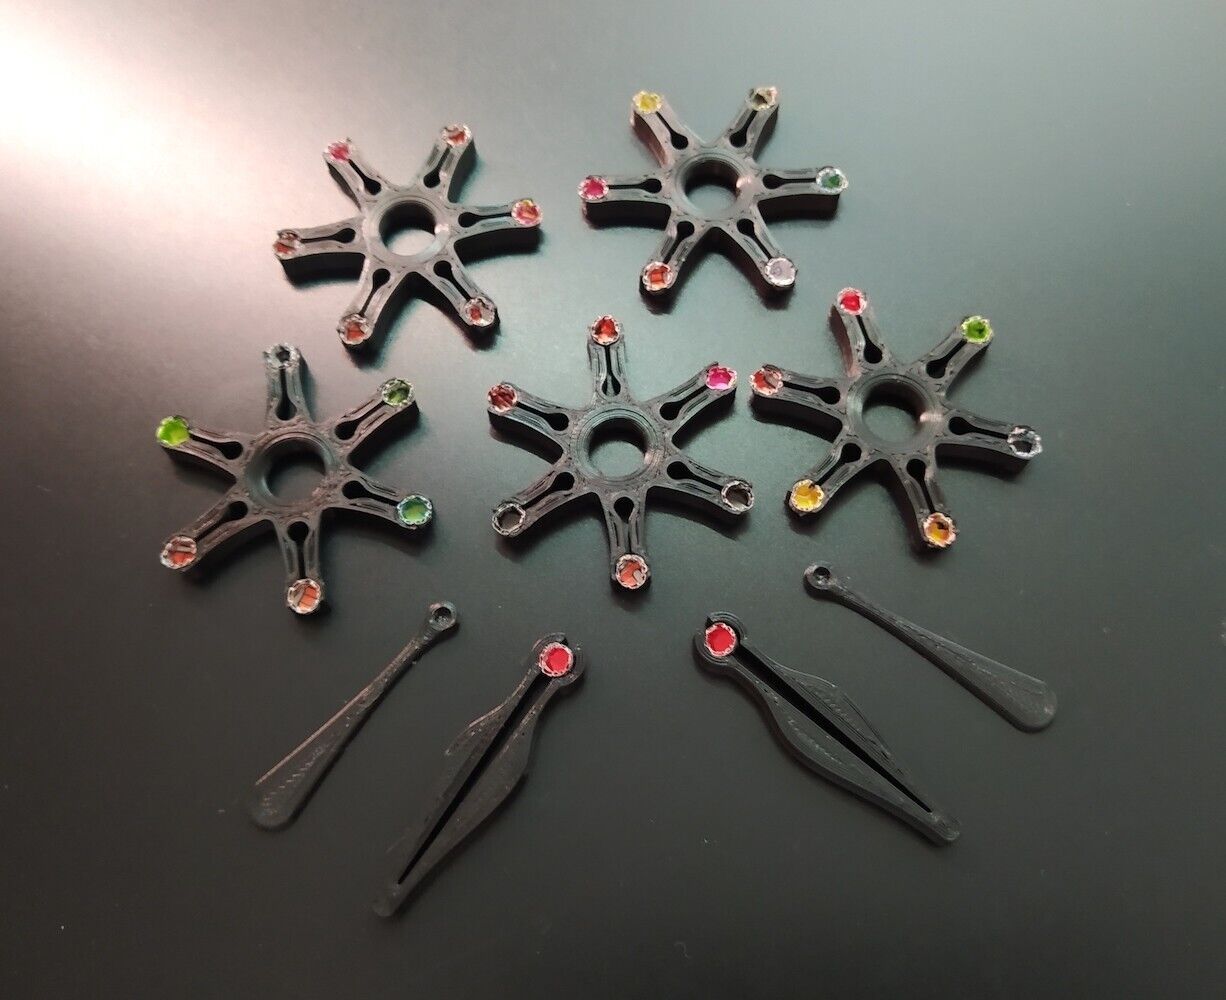 Capper Star Tool (5pcs) with Decappers(2pcs) and Deepers(2pcs). Colorful percussion caps. 